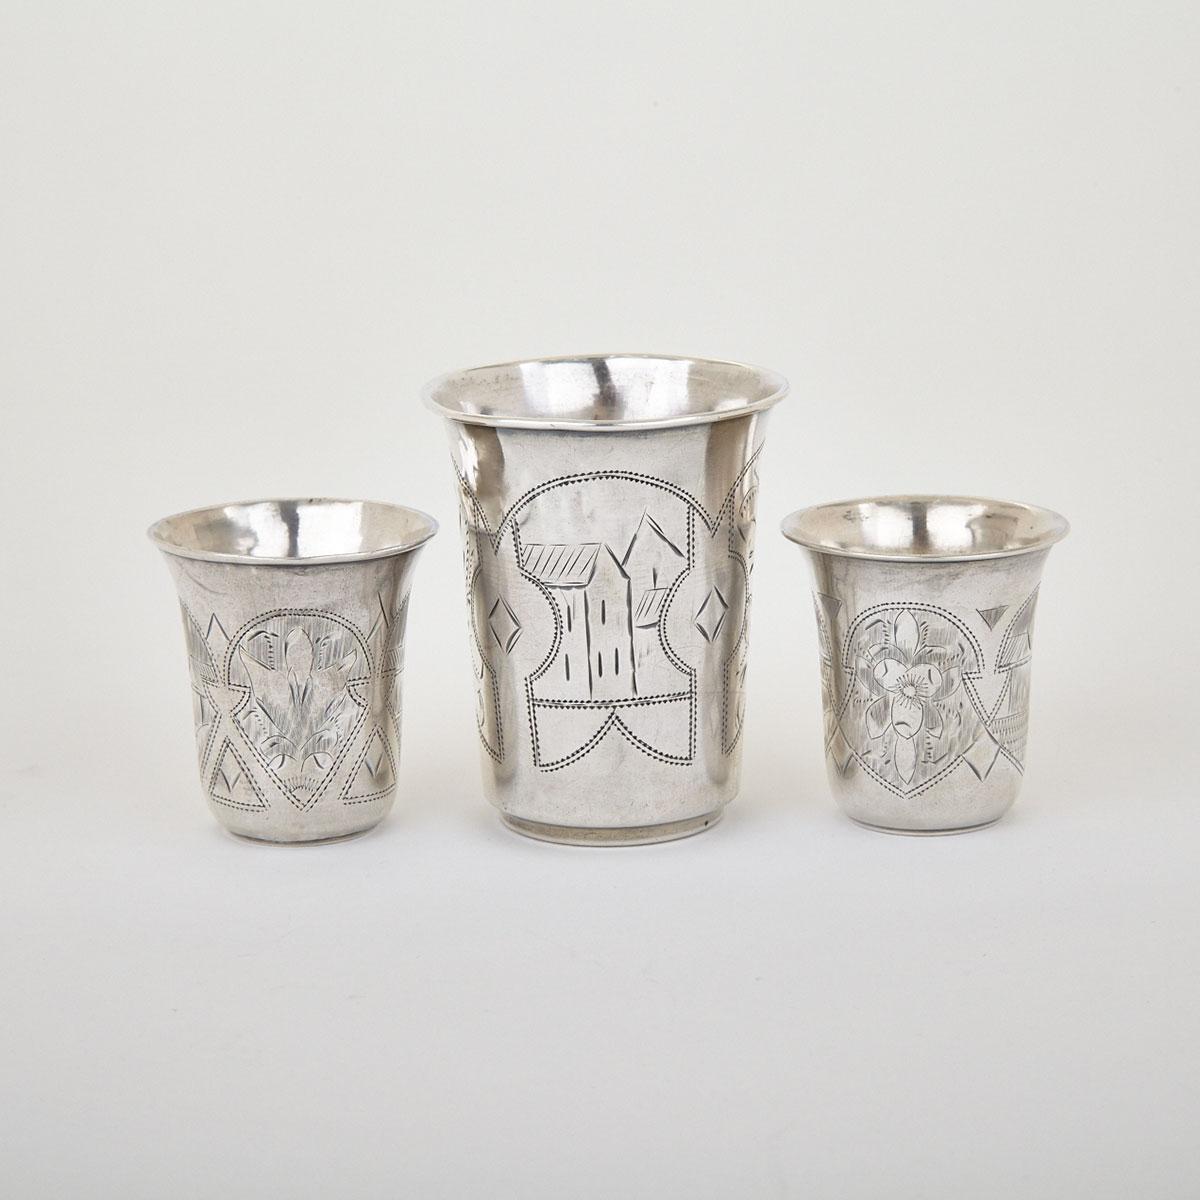 Group of Three Russian Silver Cups, Israel Eseevich Zakhoder, Kiev, late 19th century